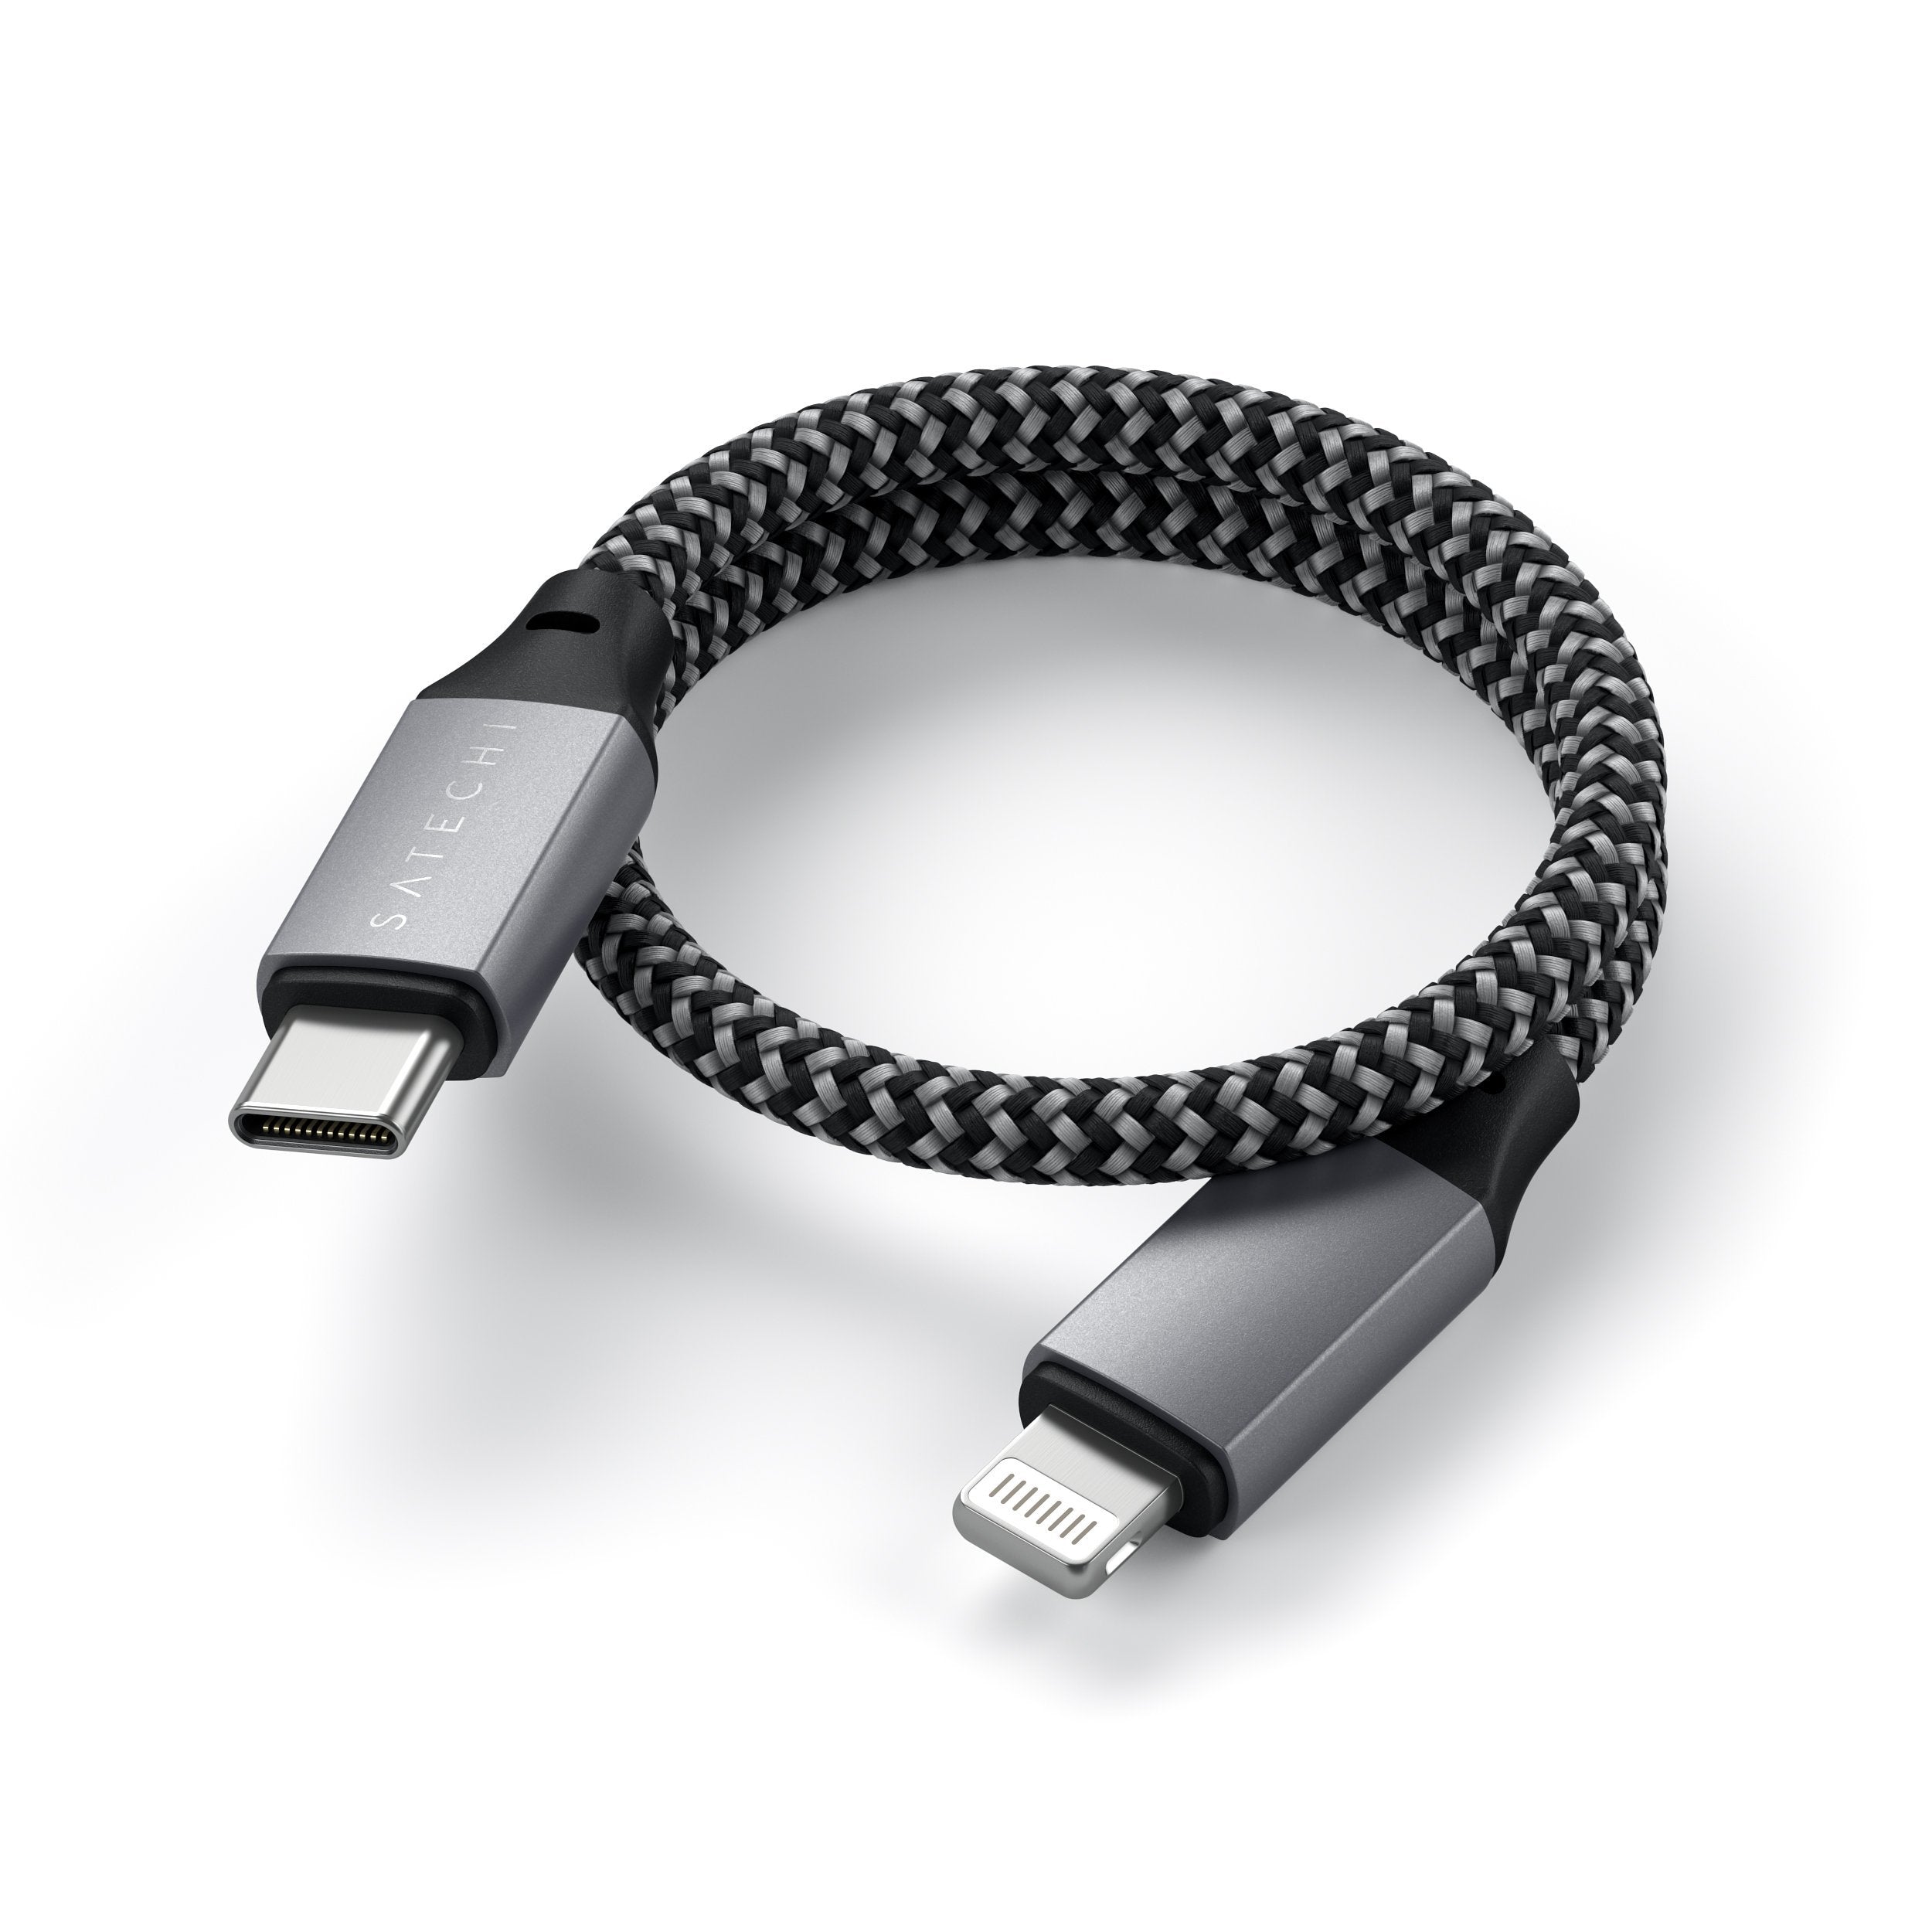 https://cdn.shopify.com/s/files/1/1520/4366/products/usb-c-to-lightning-cable-10-inches-cables-satechi-805016.jpg?v=1599758774